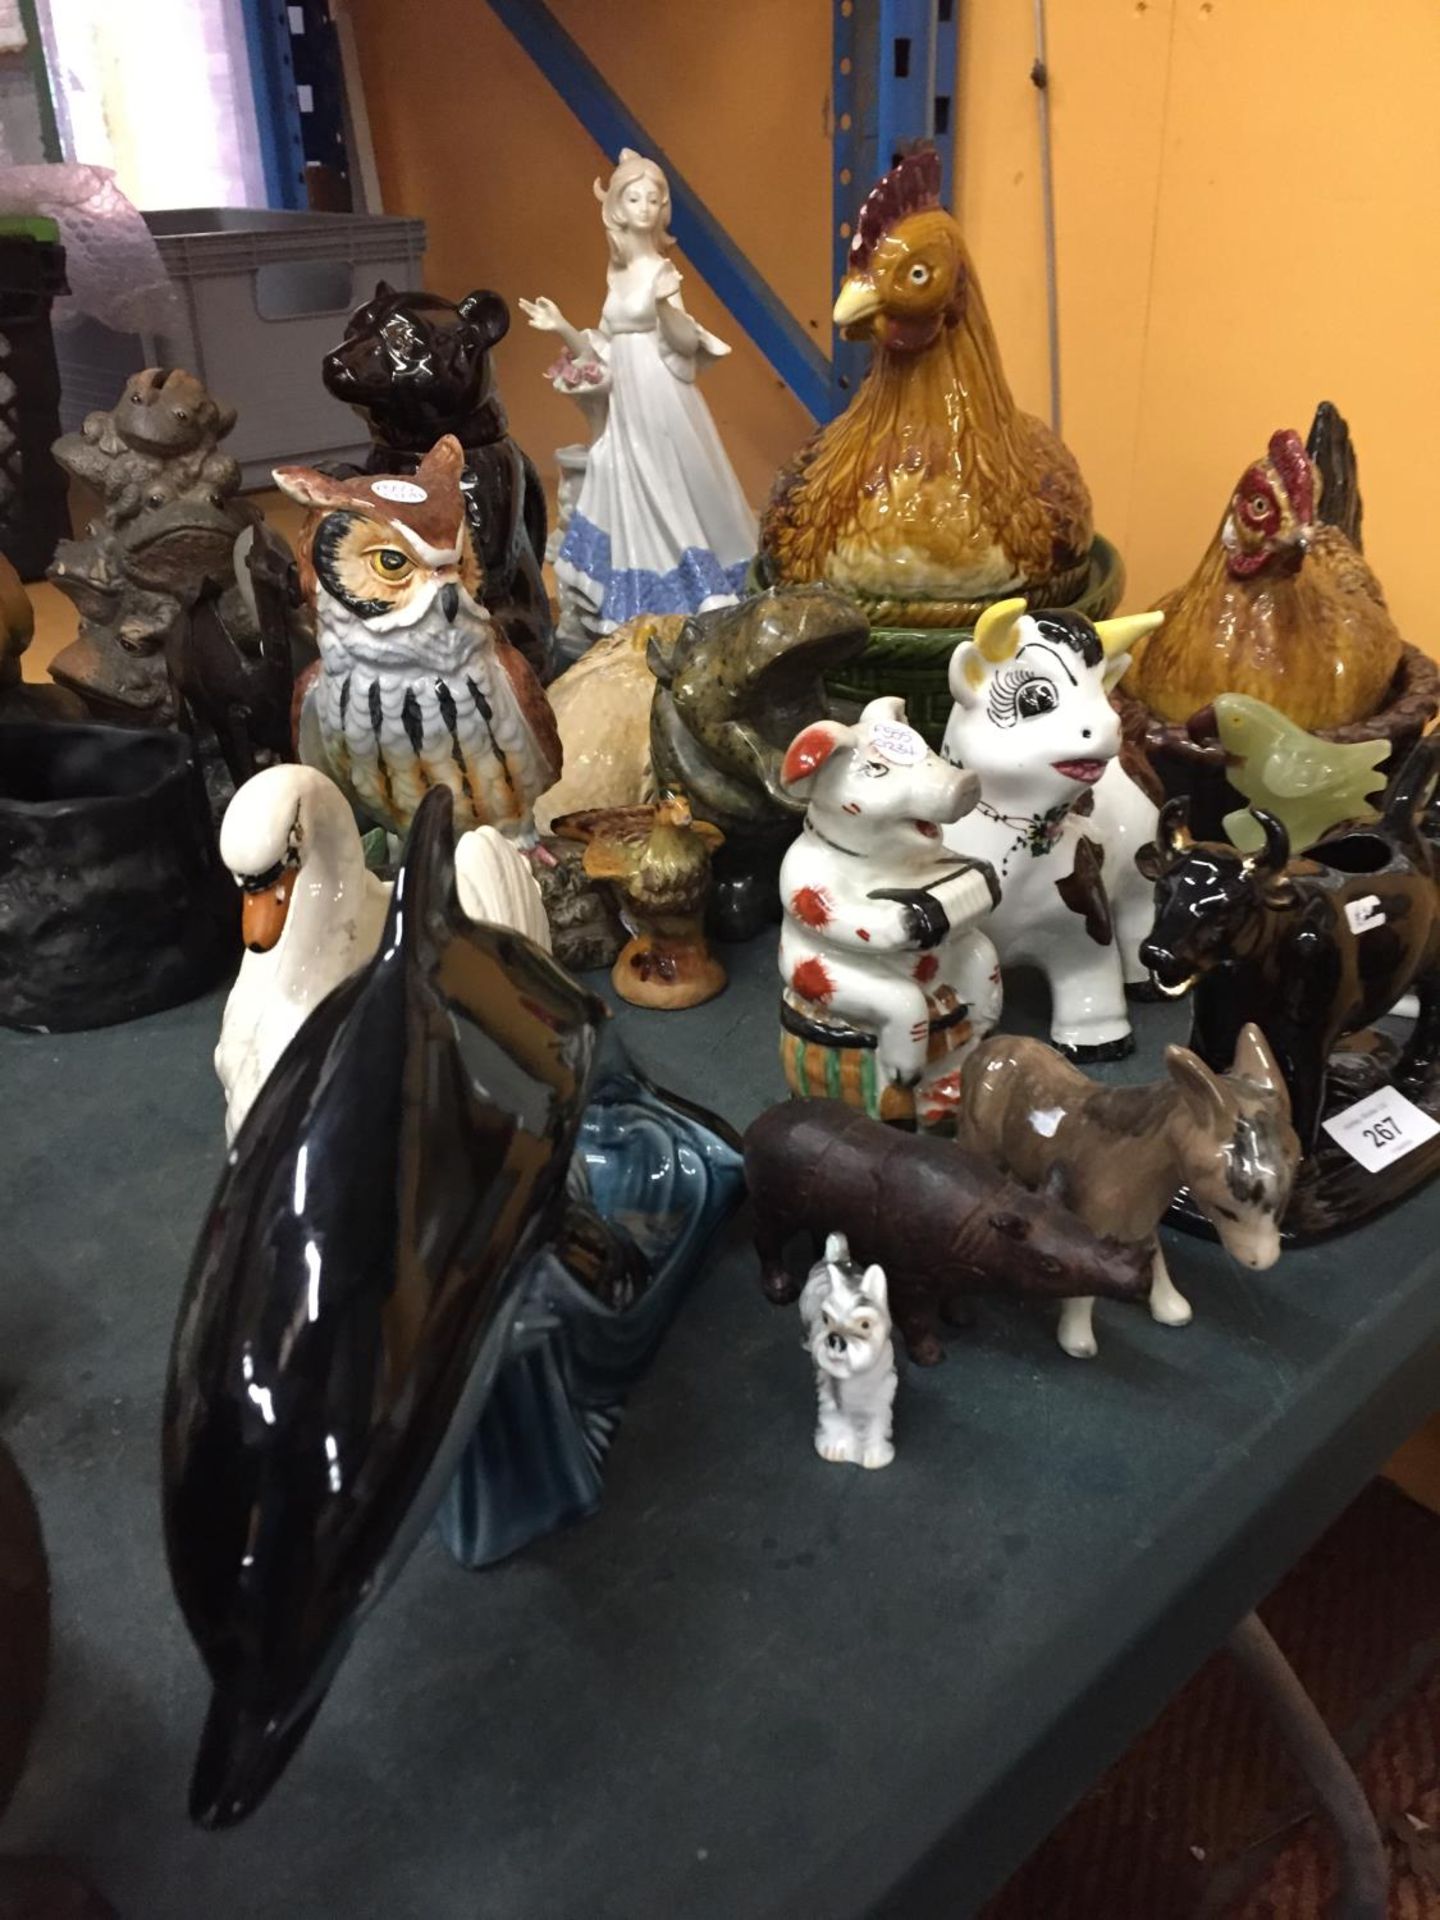 A QUANTITY OF CERAMIC ANIMALS TO INCLUDE HEN CROCKS, OWLS, COWS, PIGS, A POOLE DOLPHIN, ETC - Image 2 of 6